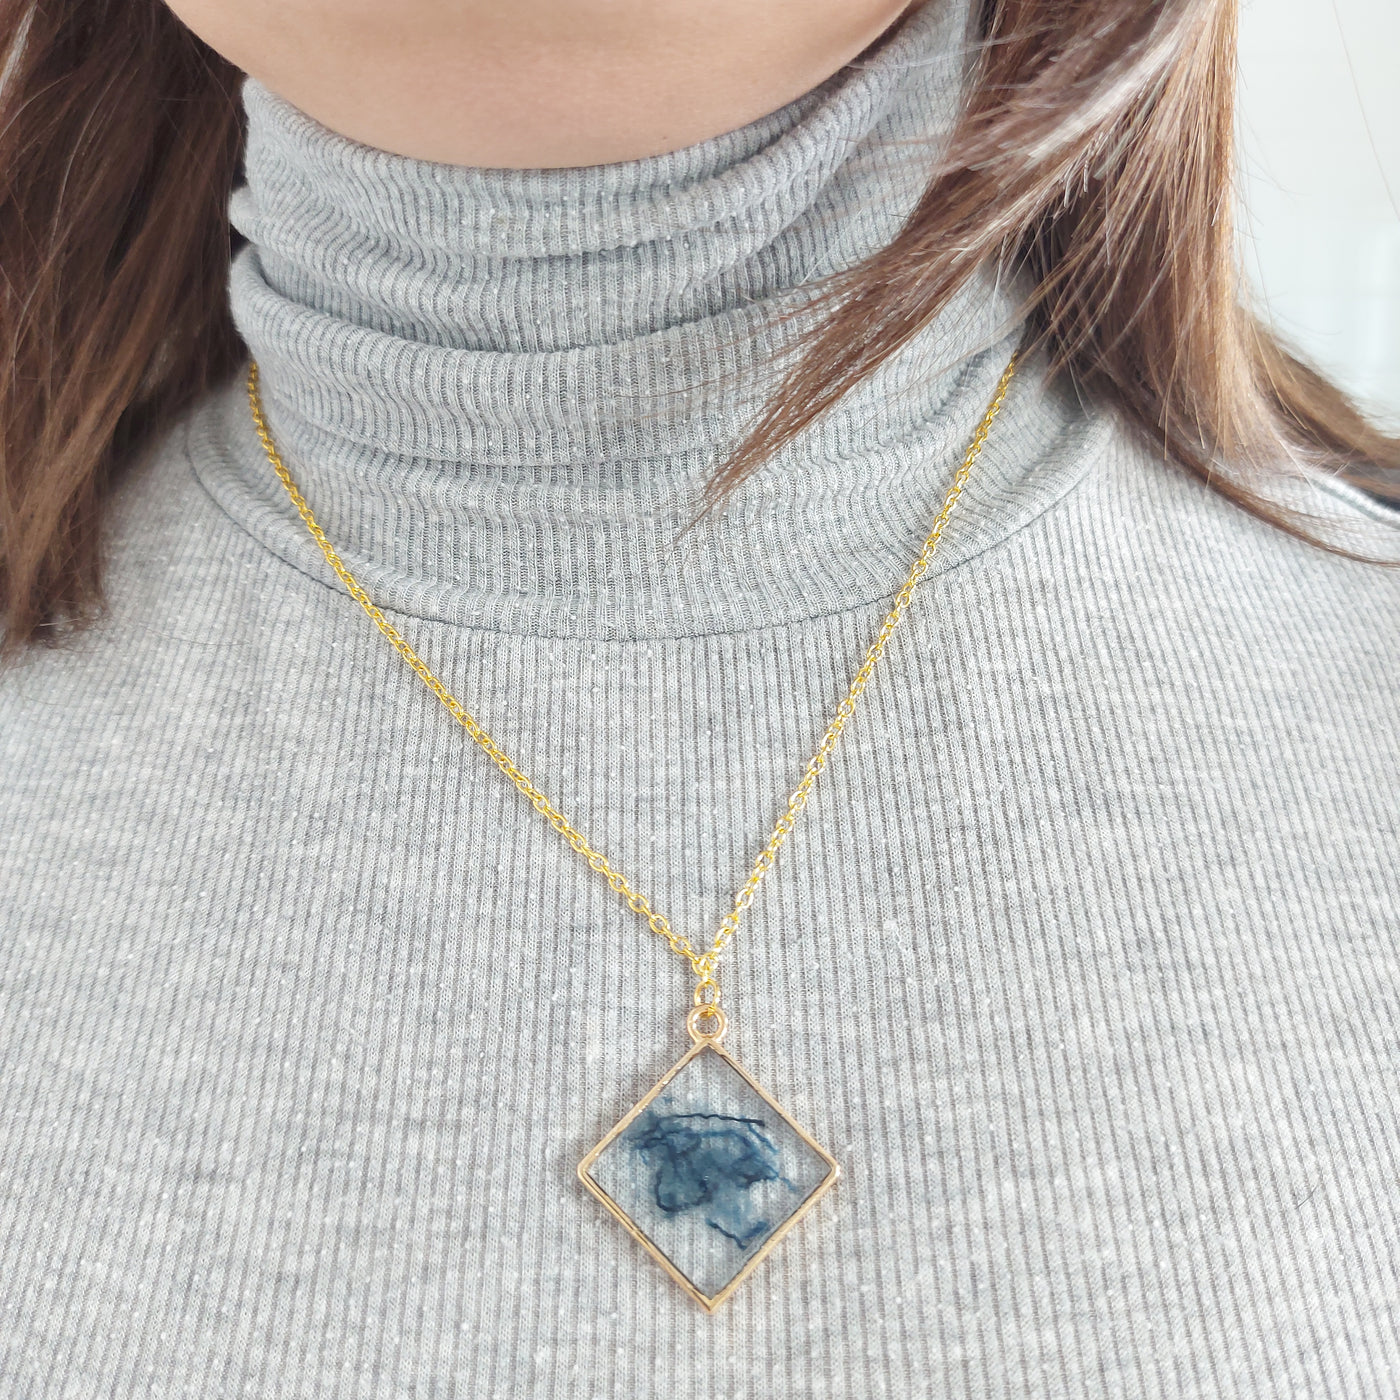 Square pendant necklace and jeans